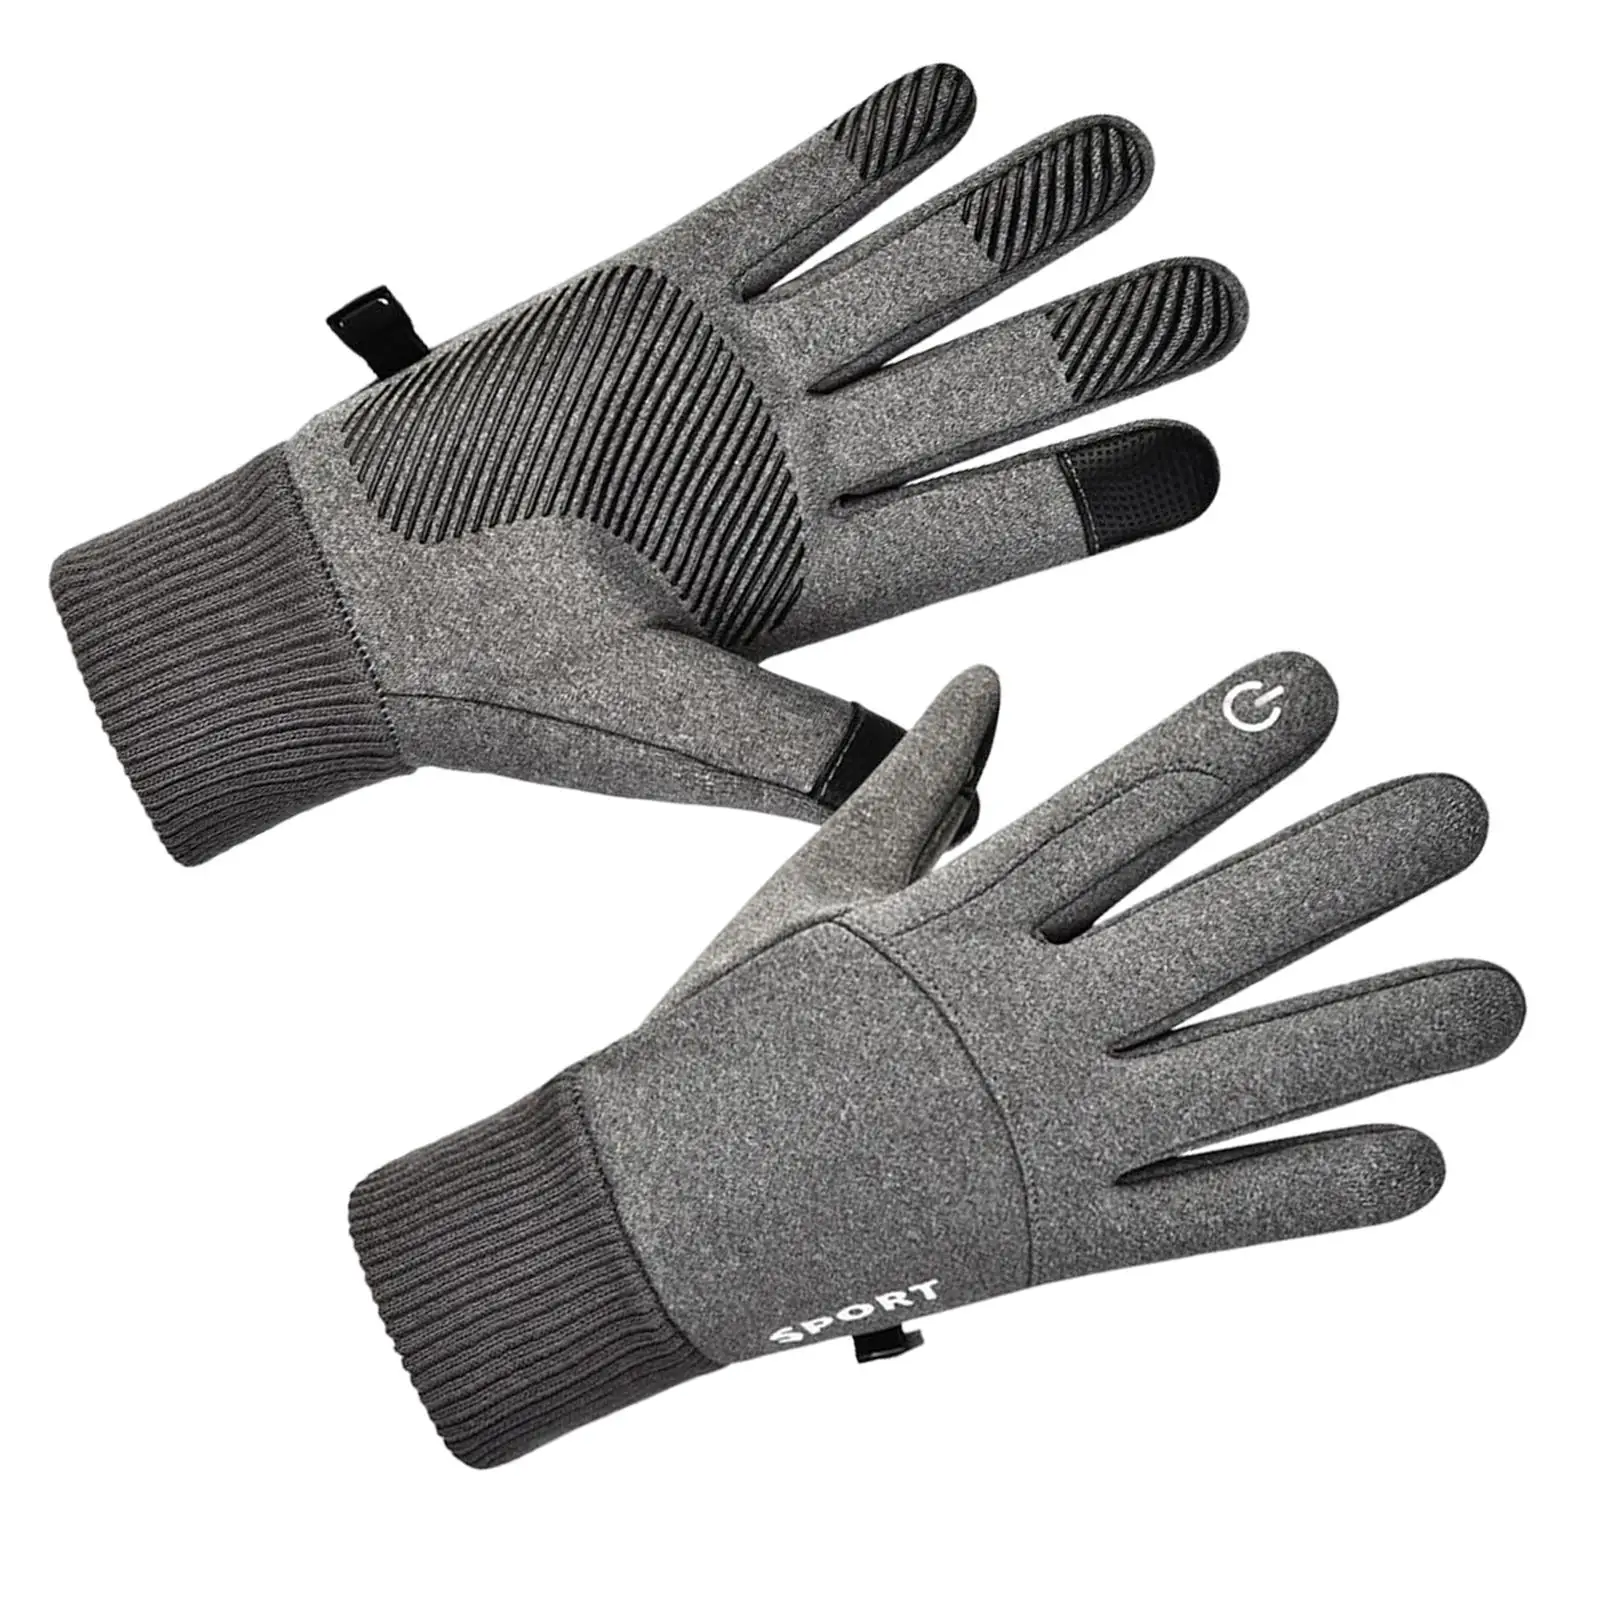 Cycling Gloves, Wear Resistant Mittens Weather Resistant Fashion Commuting Non